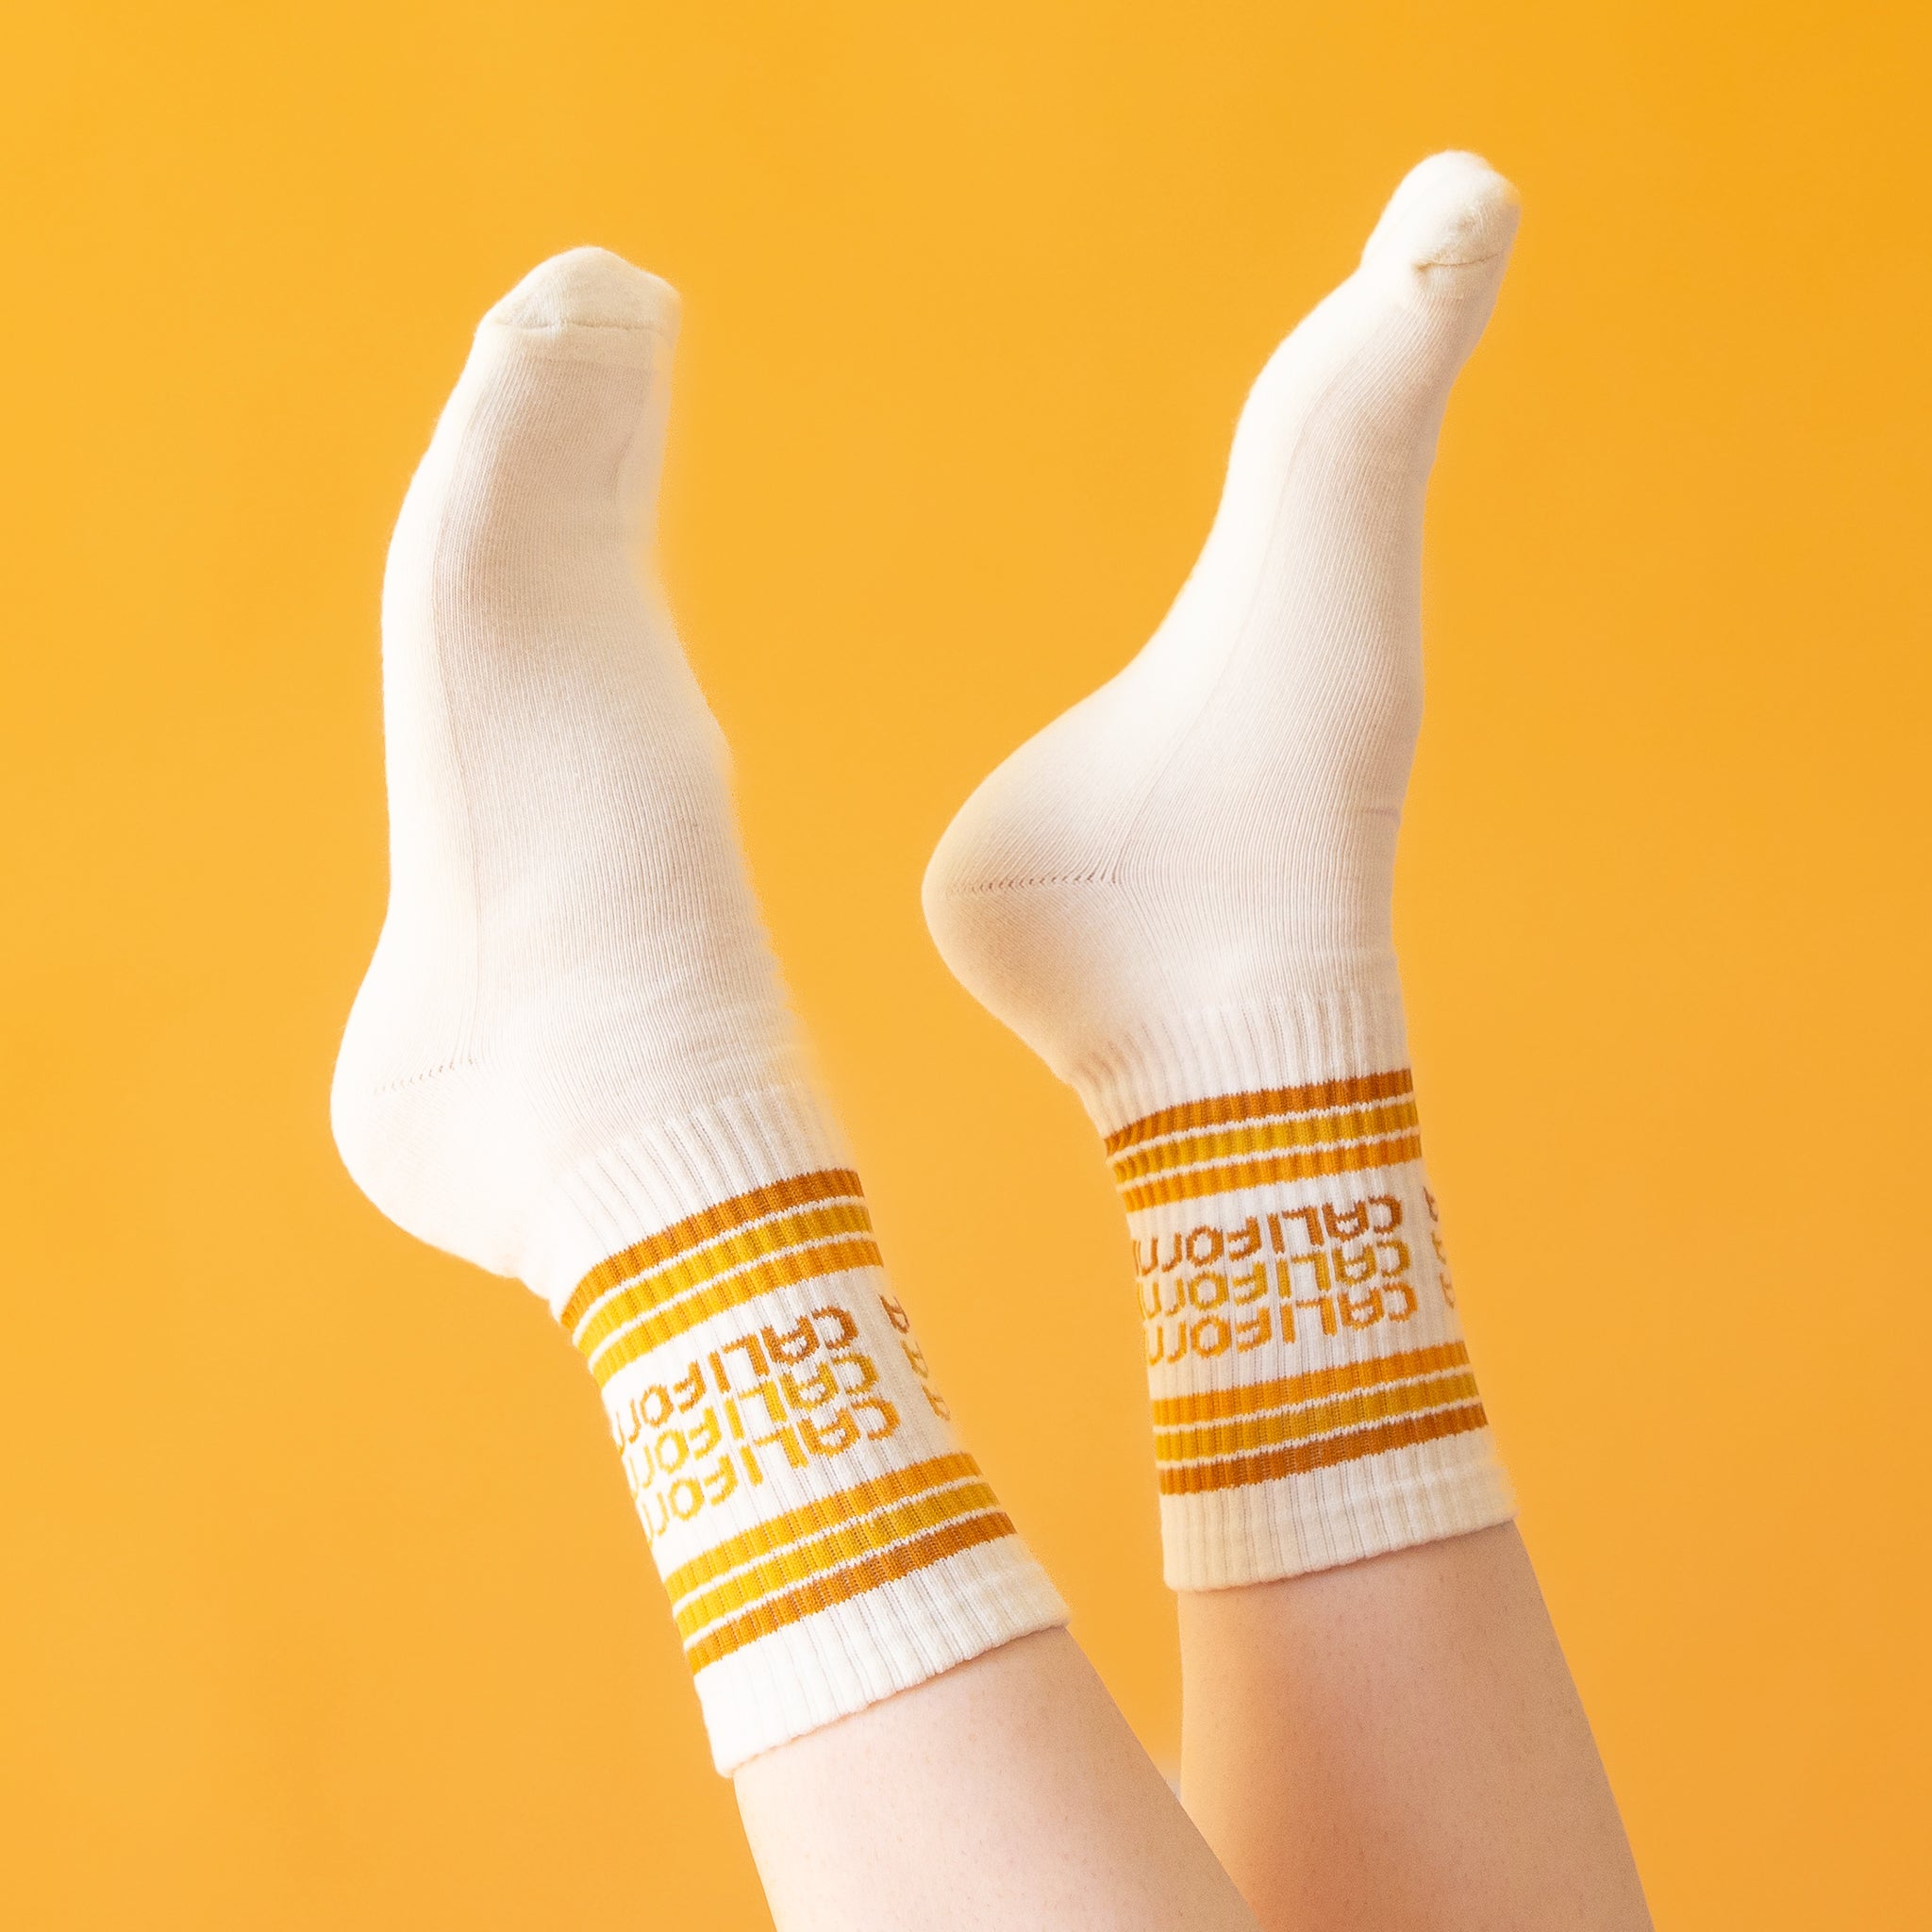 On a yellow background is a white socks with rust, yellow and orange stripes and "california" printed three times on the ankle.